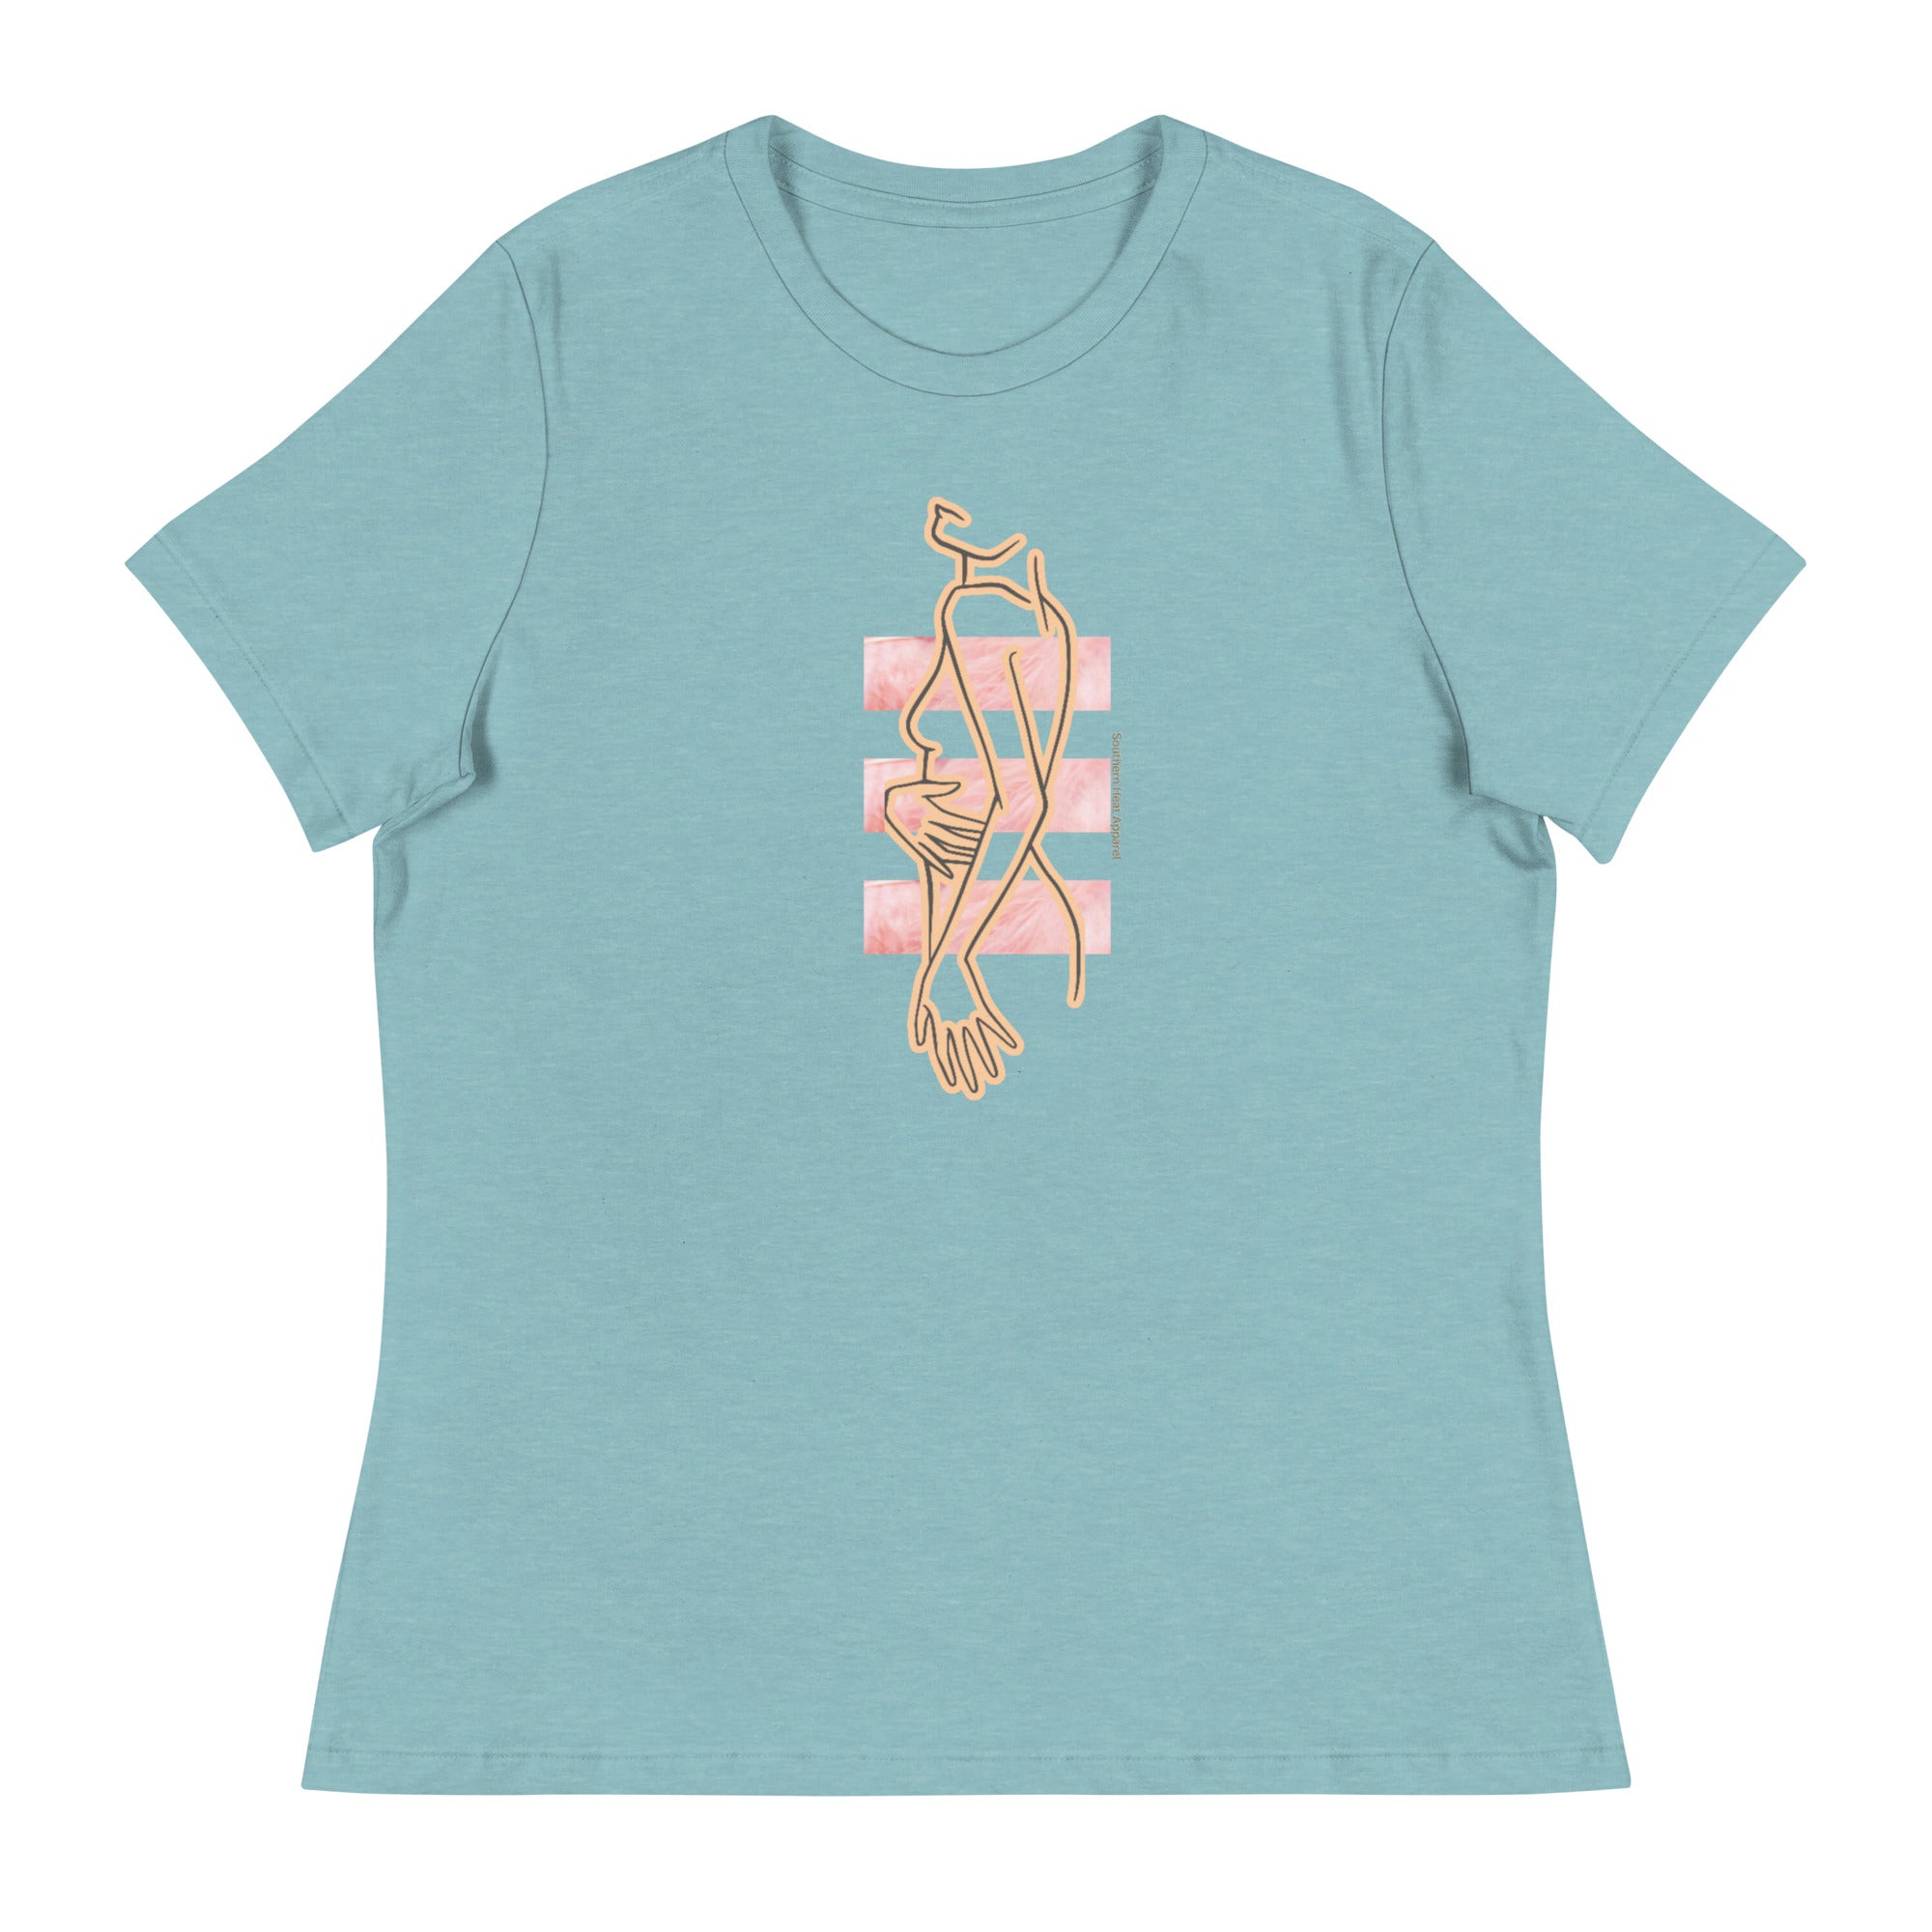 Woman- Woman's Relaxed T-Shirt